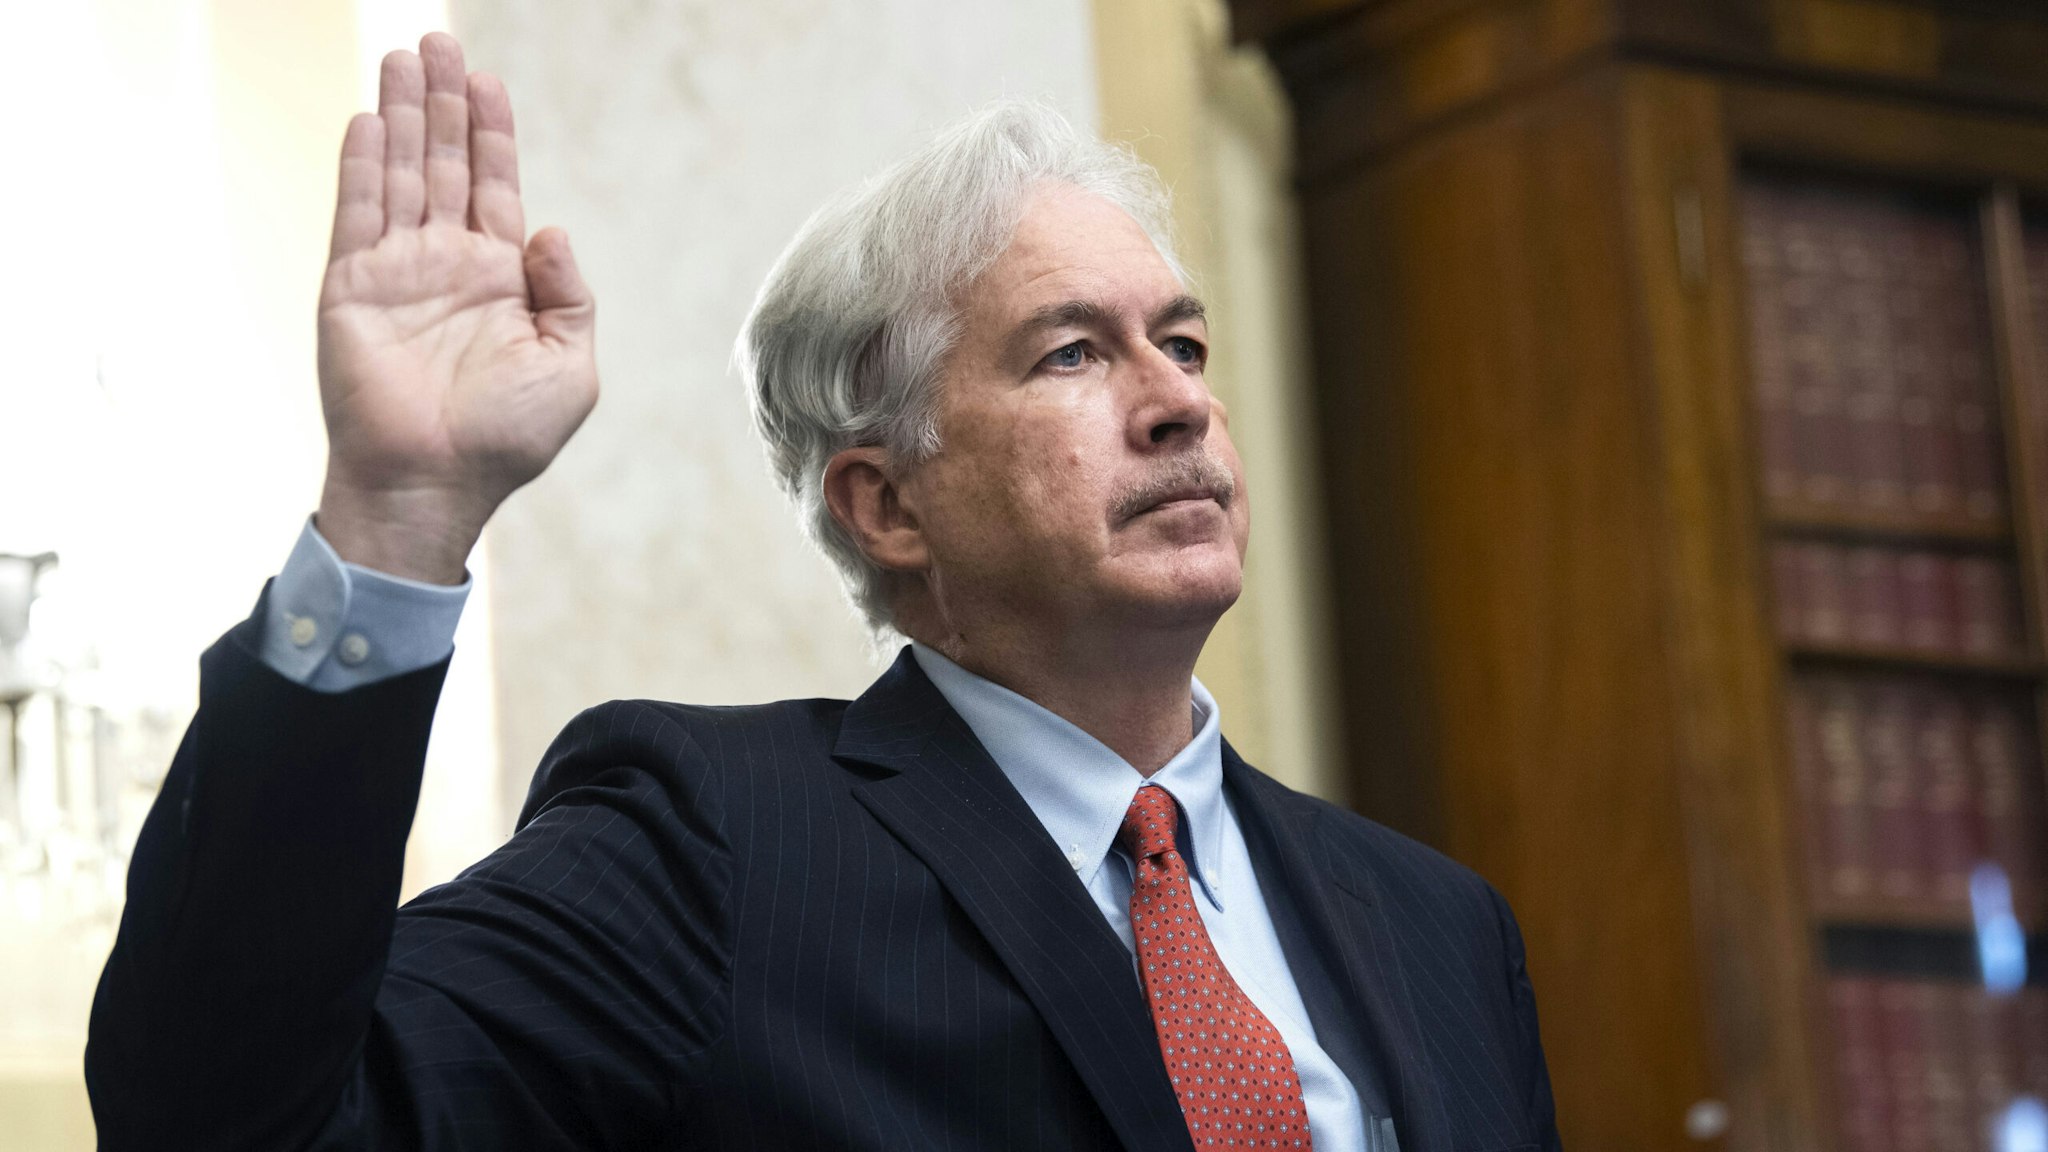 UNITED STATES - FEBRUARY 24: William Burns, nominee for Central Intelligence Agency director, is sworn into his Senate Select Intelligence Committee confirmation hearing in Russell Senate Office Building on Capitol Hill in Washington, D.C., on Wednesday, February 24, 2021.